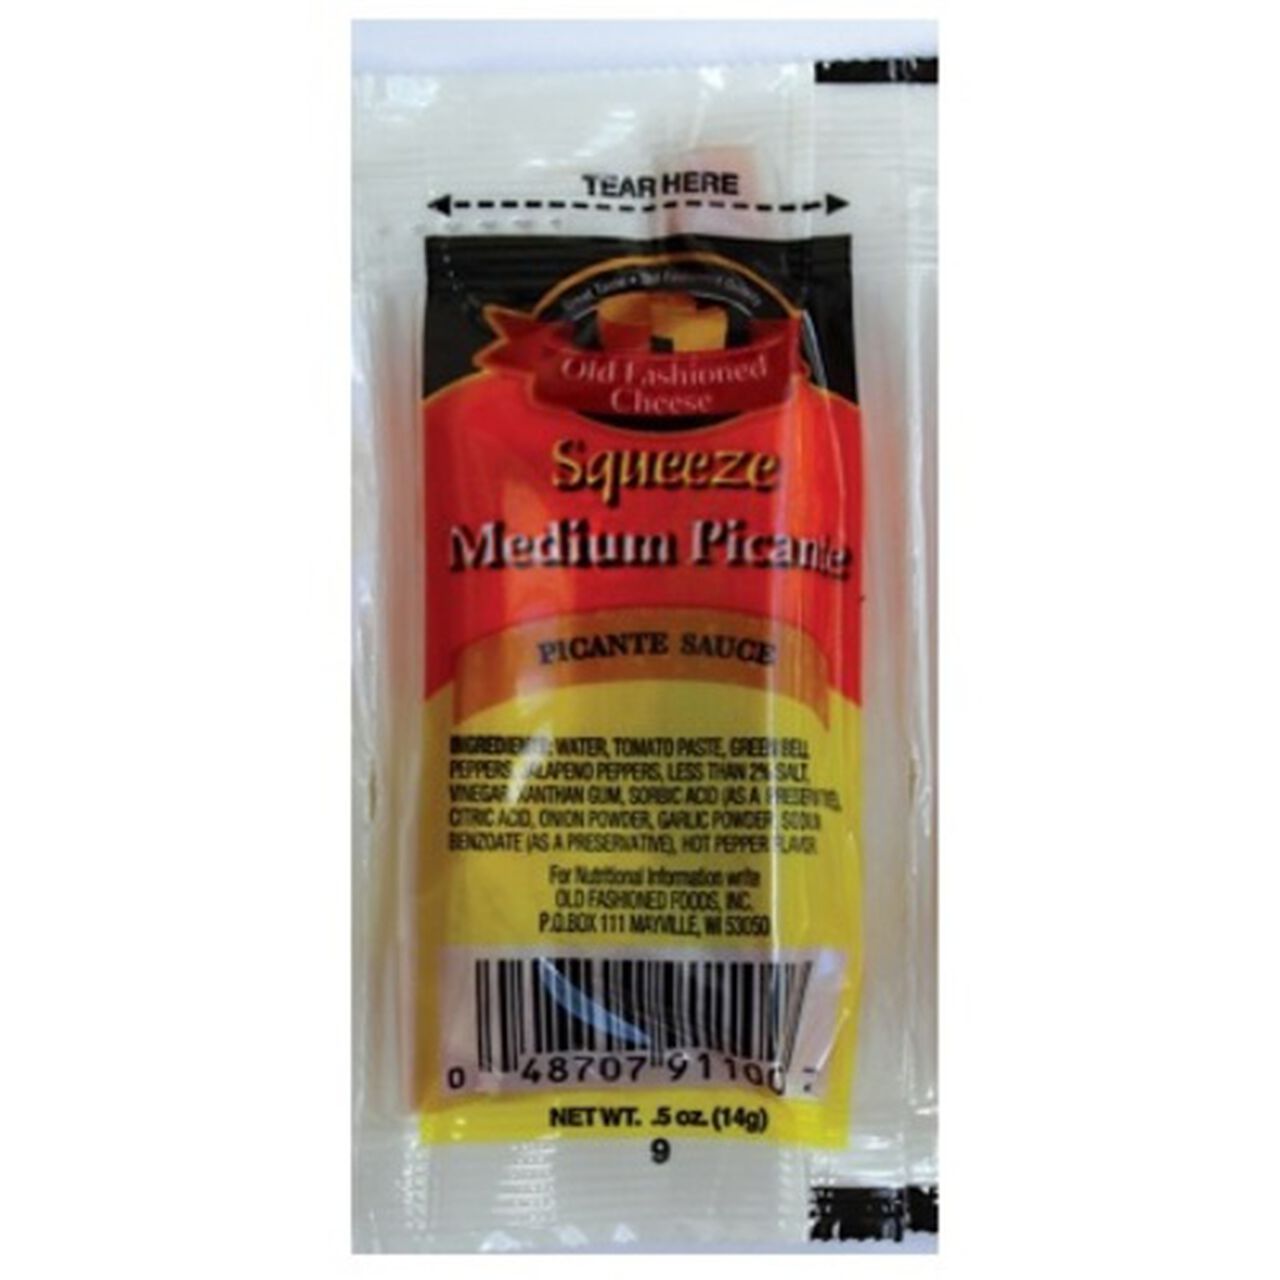 Medium Picante Sauce Packet 0.5 oz image number 0